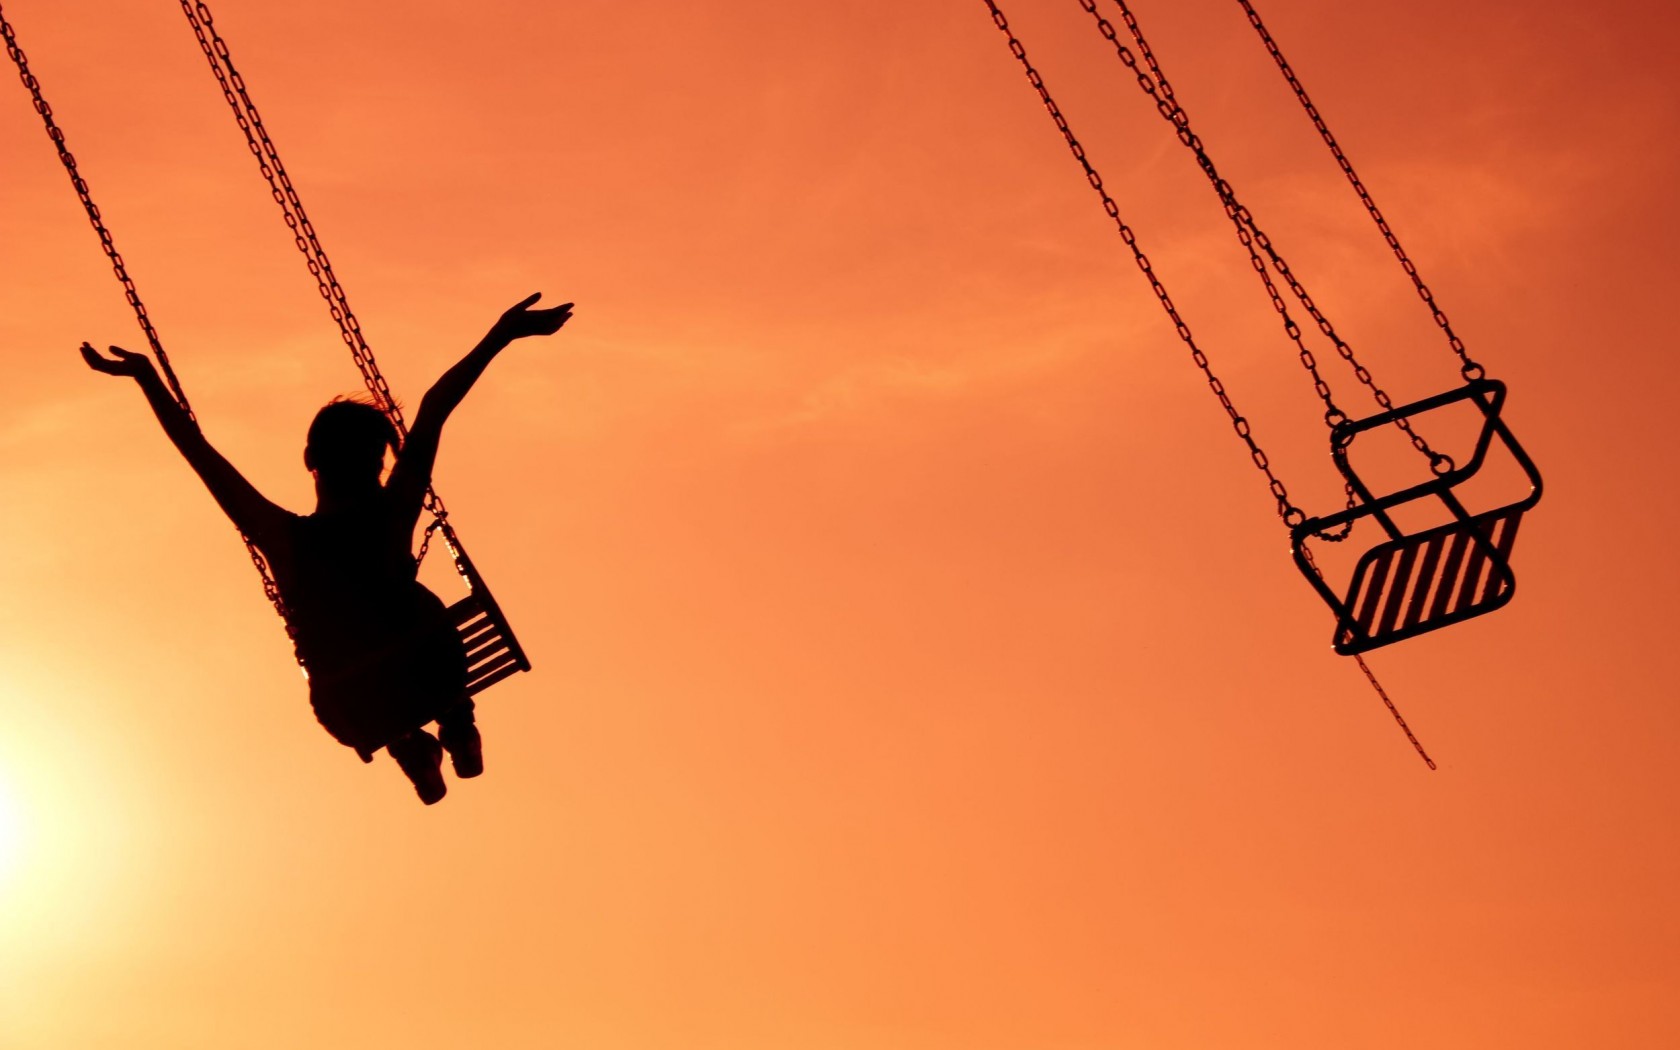 happy mood wallpapers hd,swing,outdoor play equipment,sky,trapeze,fun